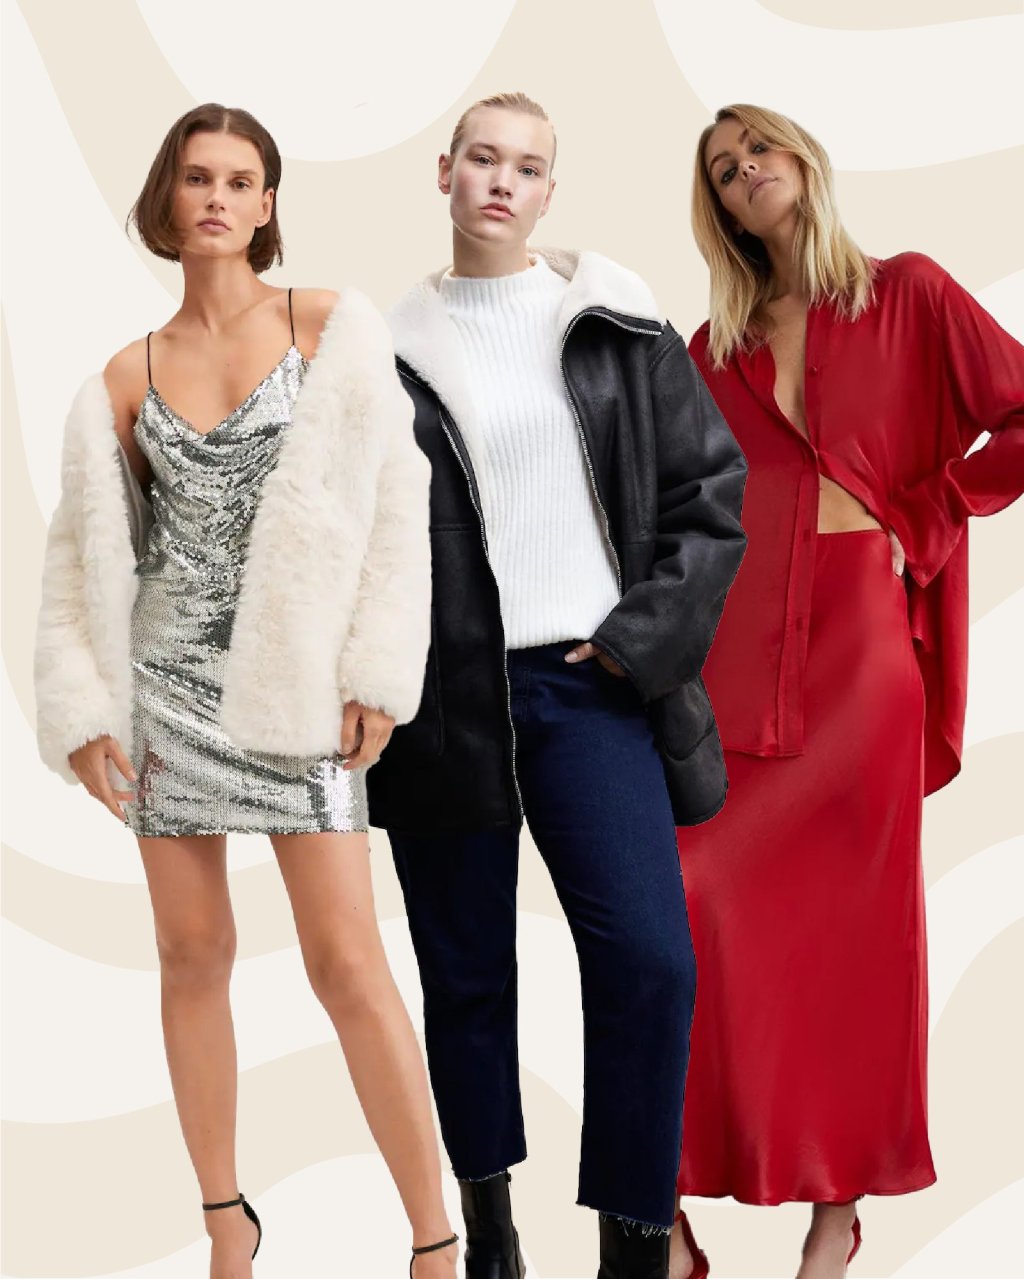 Best Cyber Monday Fashion Deals 2022: All The Best Sales To Look For